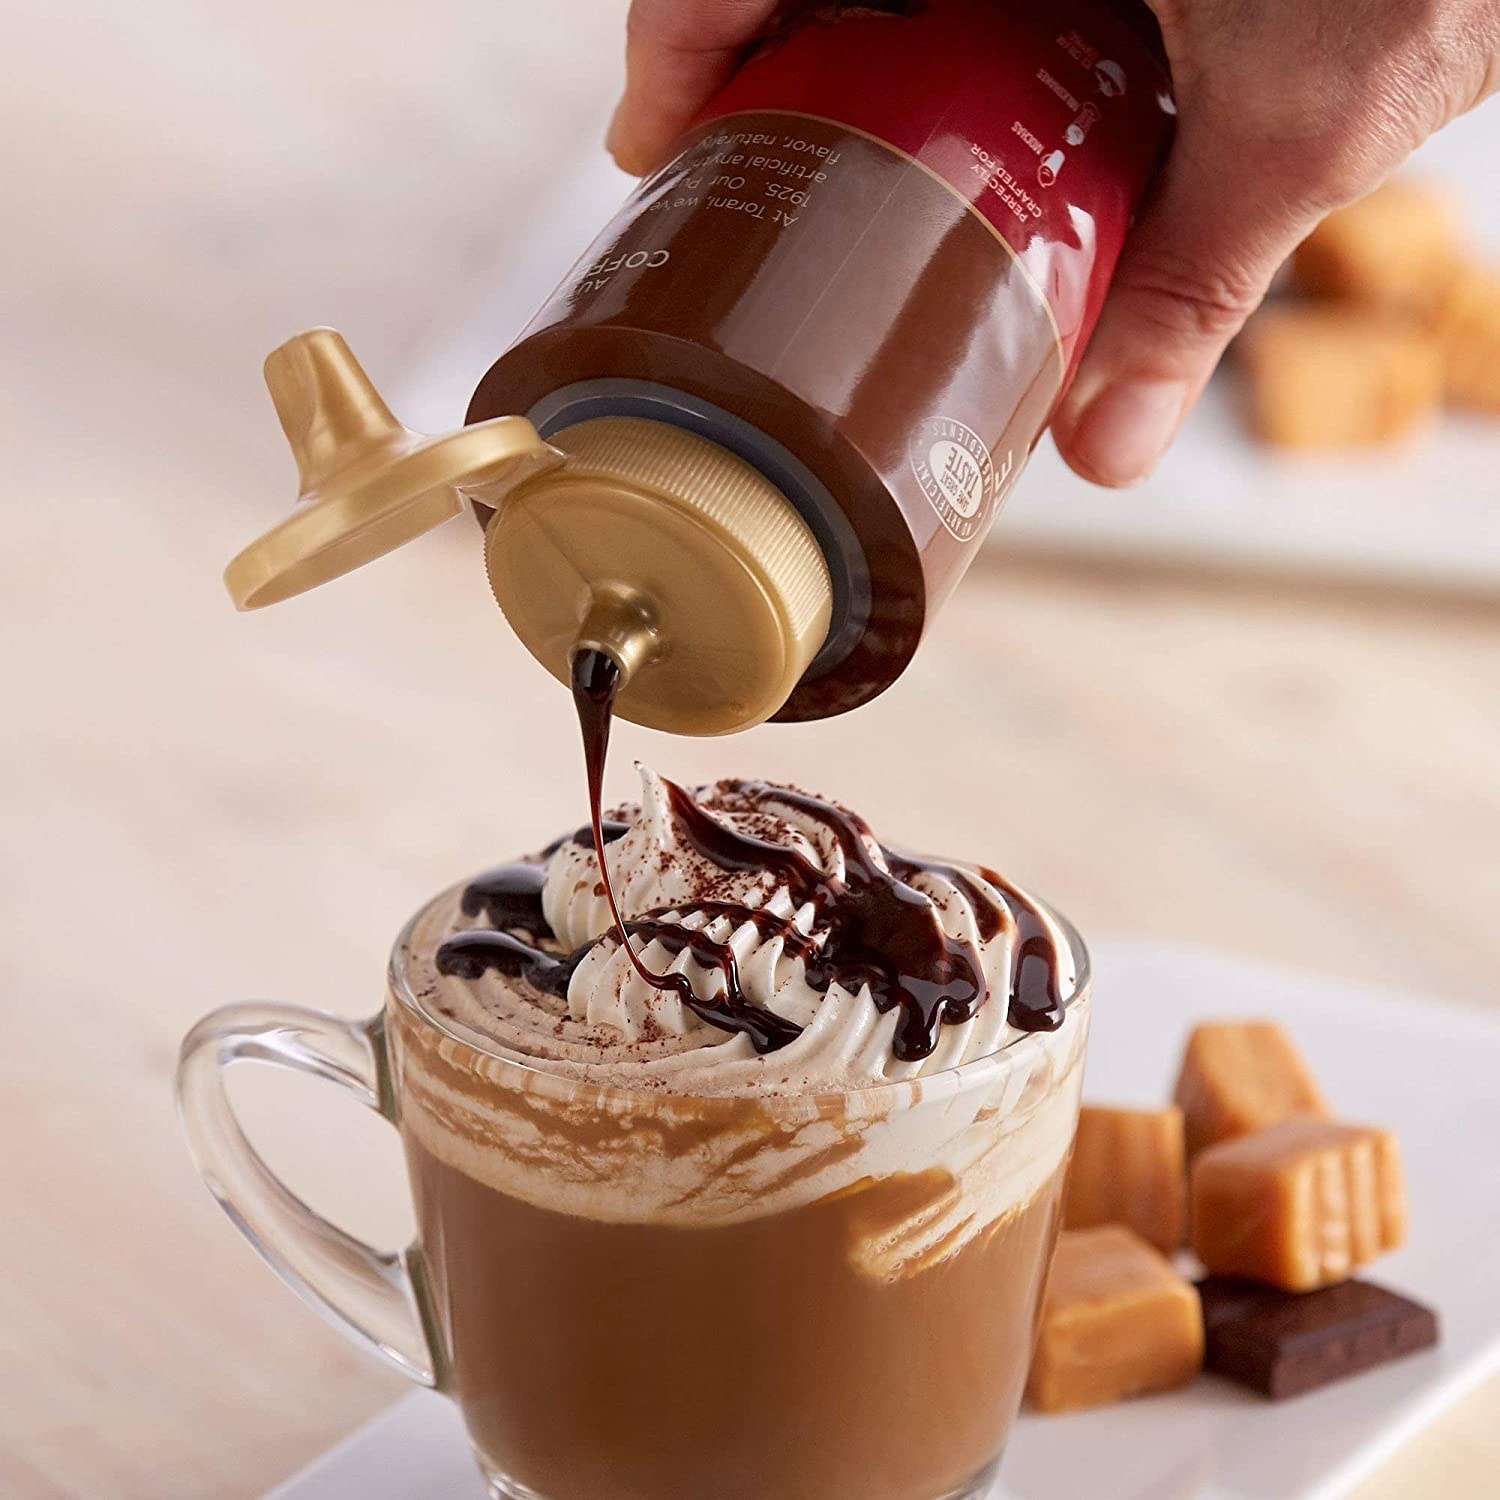 A person pouring caramel sauce on their cup of coffee with whipped cream